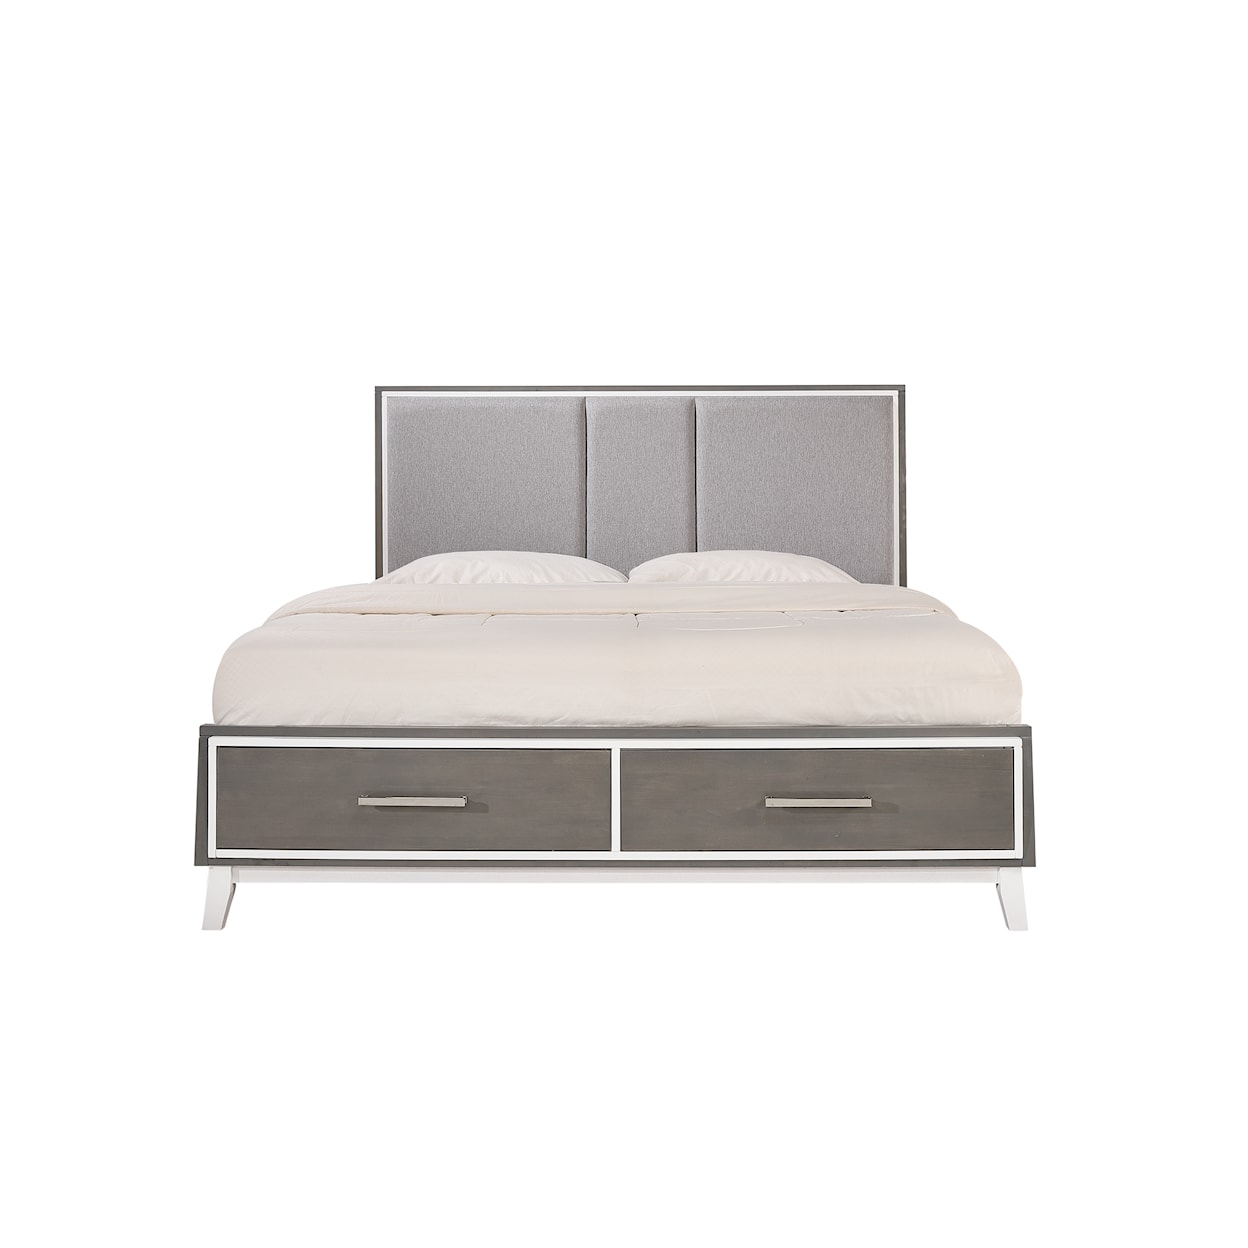 New Classic Furniture Zephyr King Bed